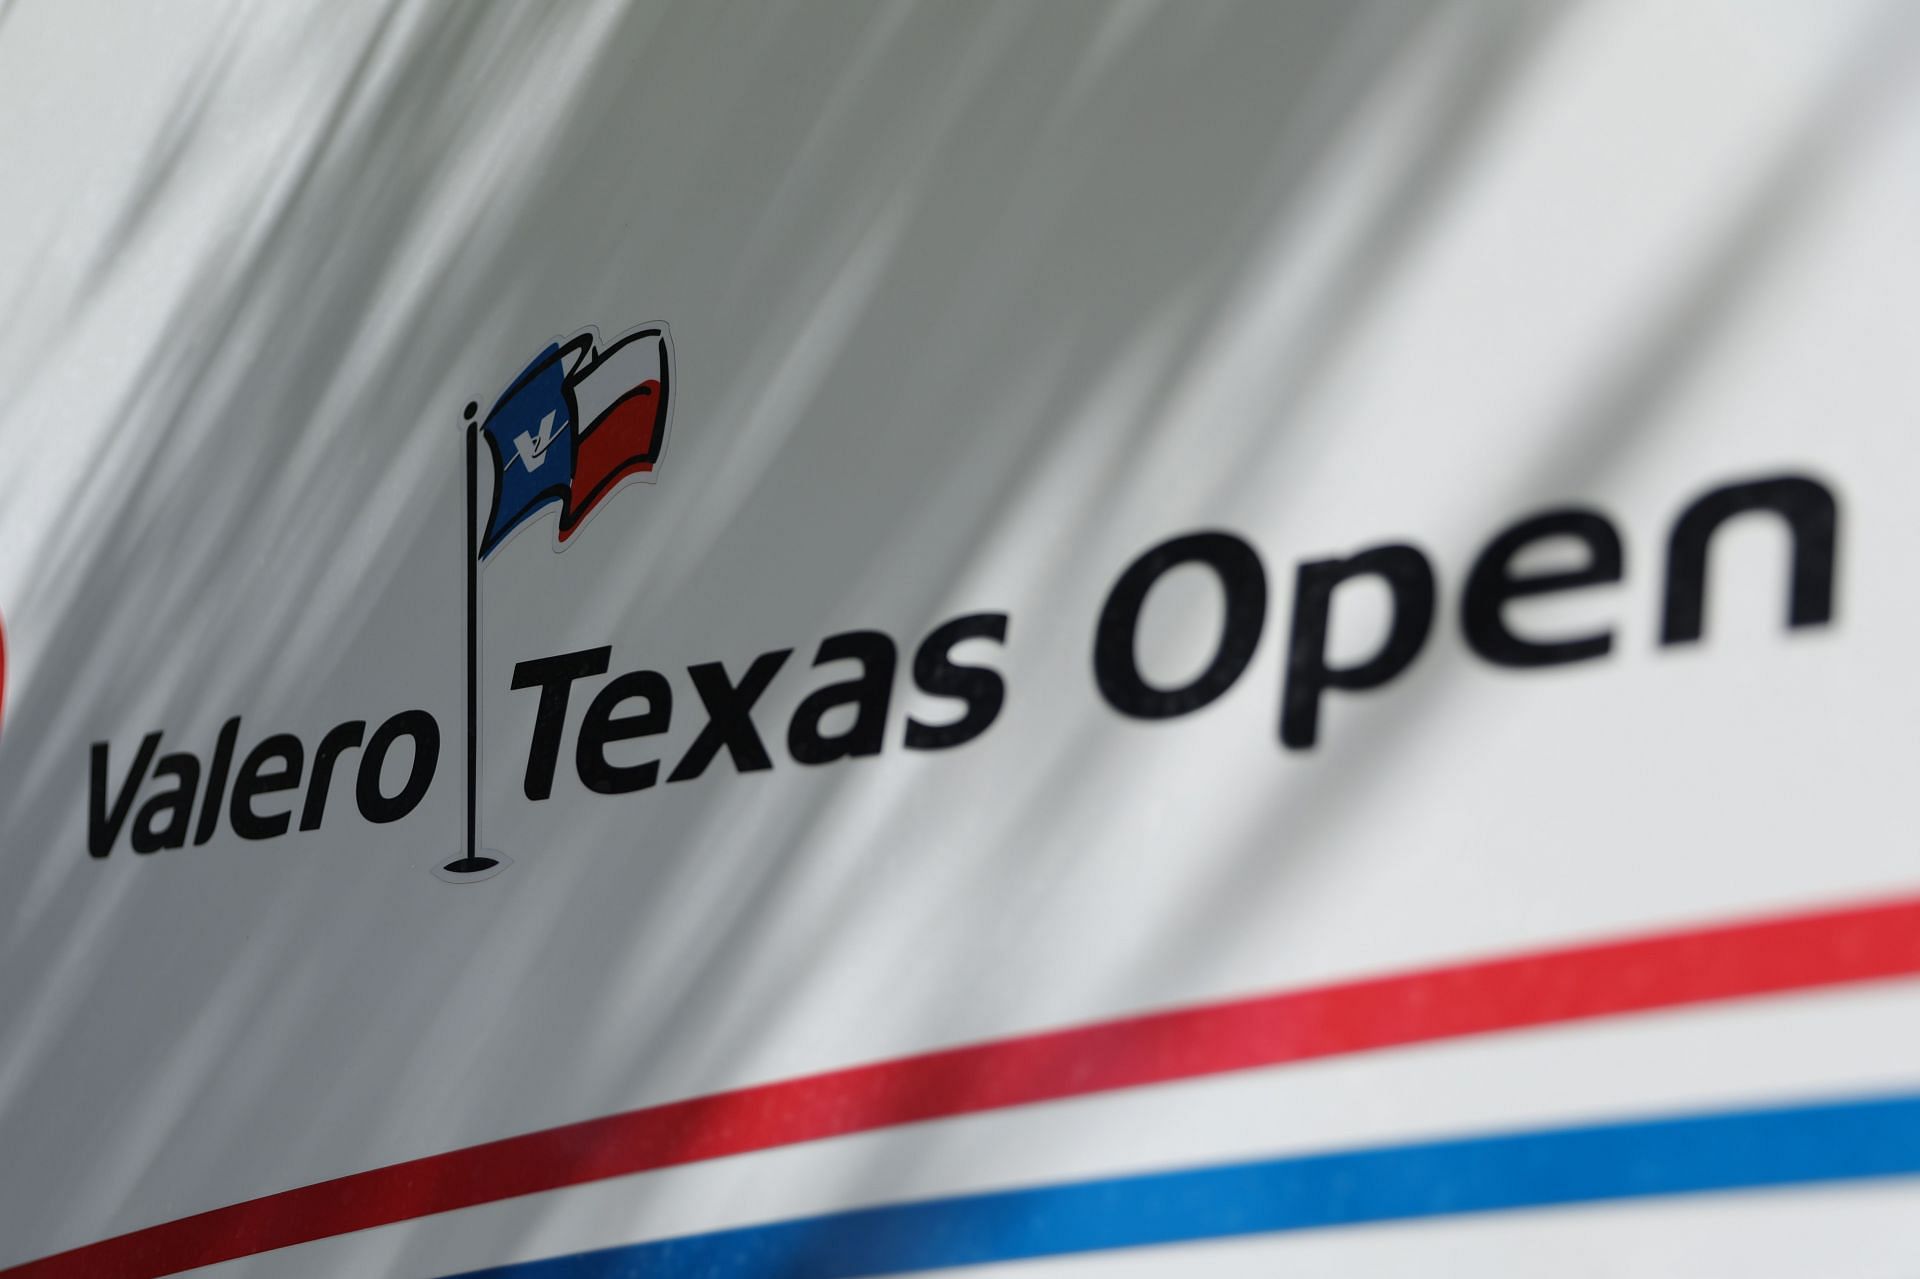 2023 Valero Texas Open Schedule, prize purse, and more